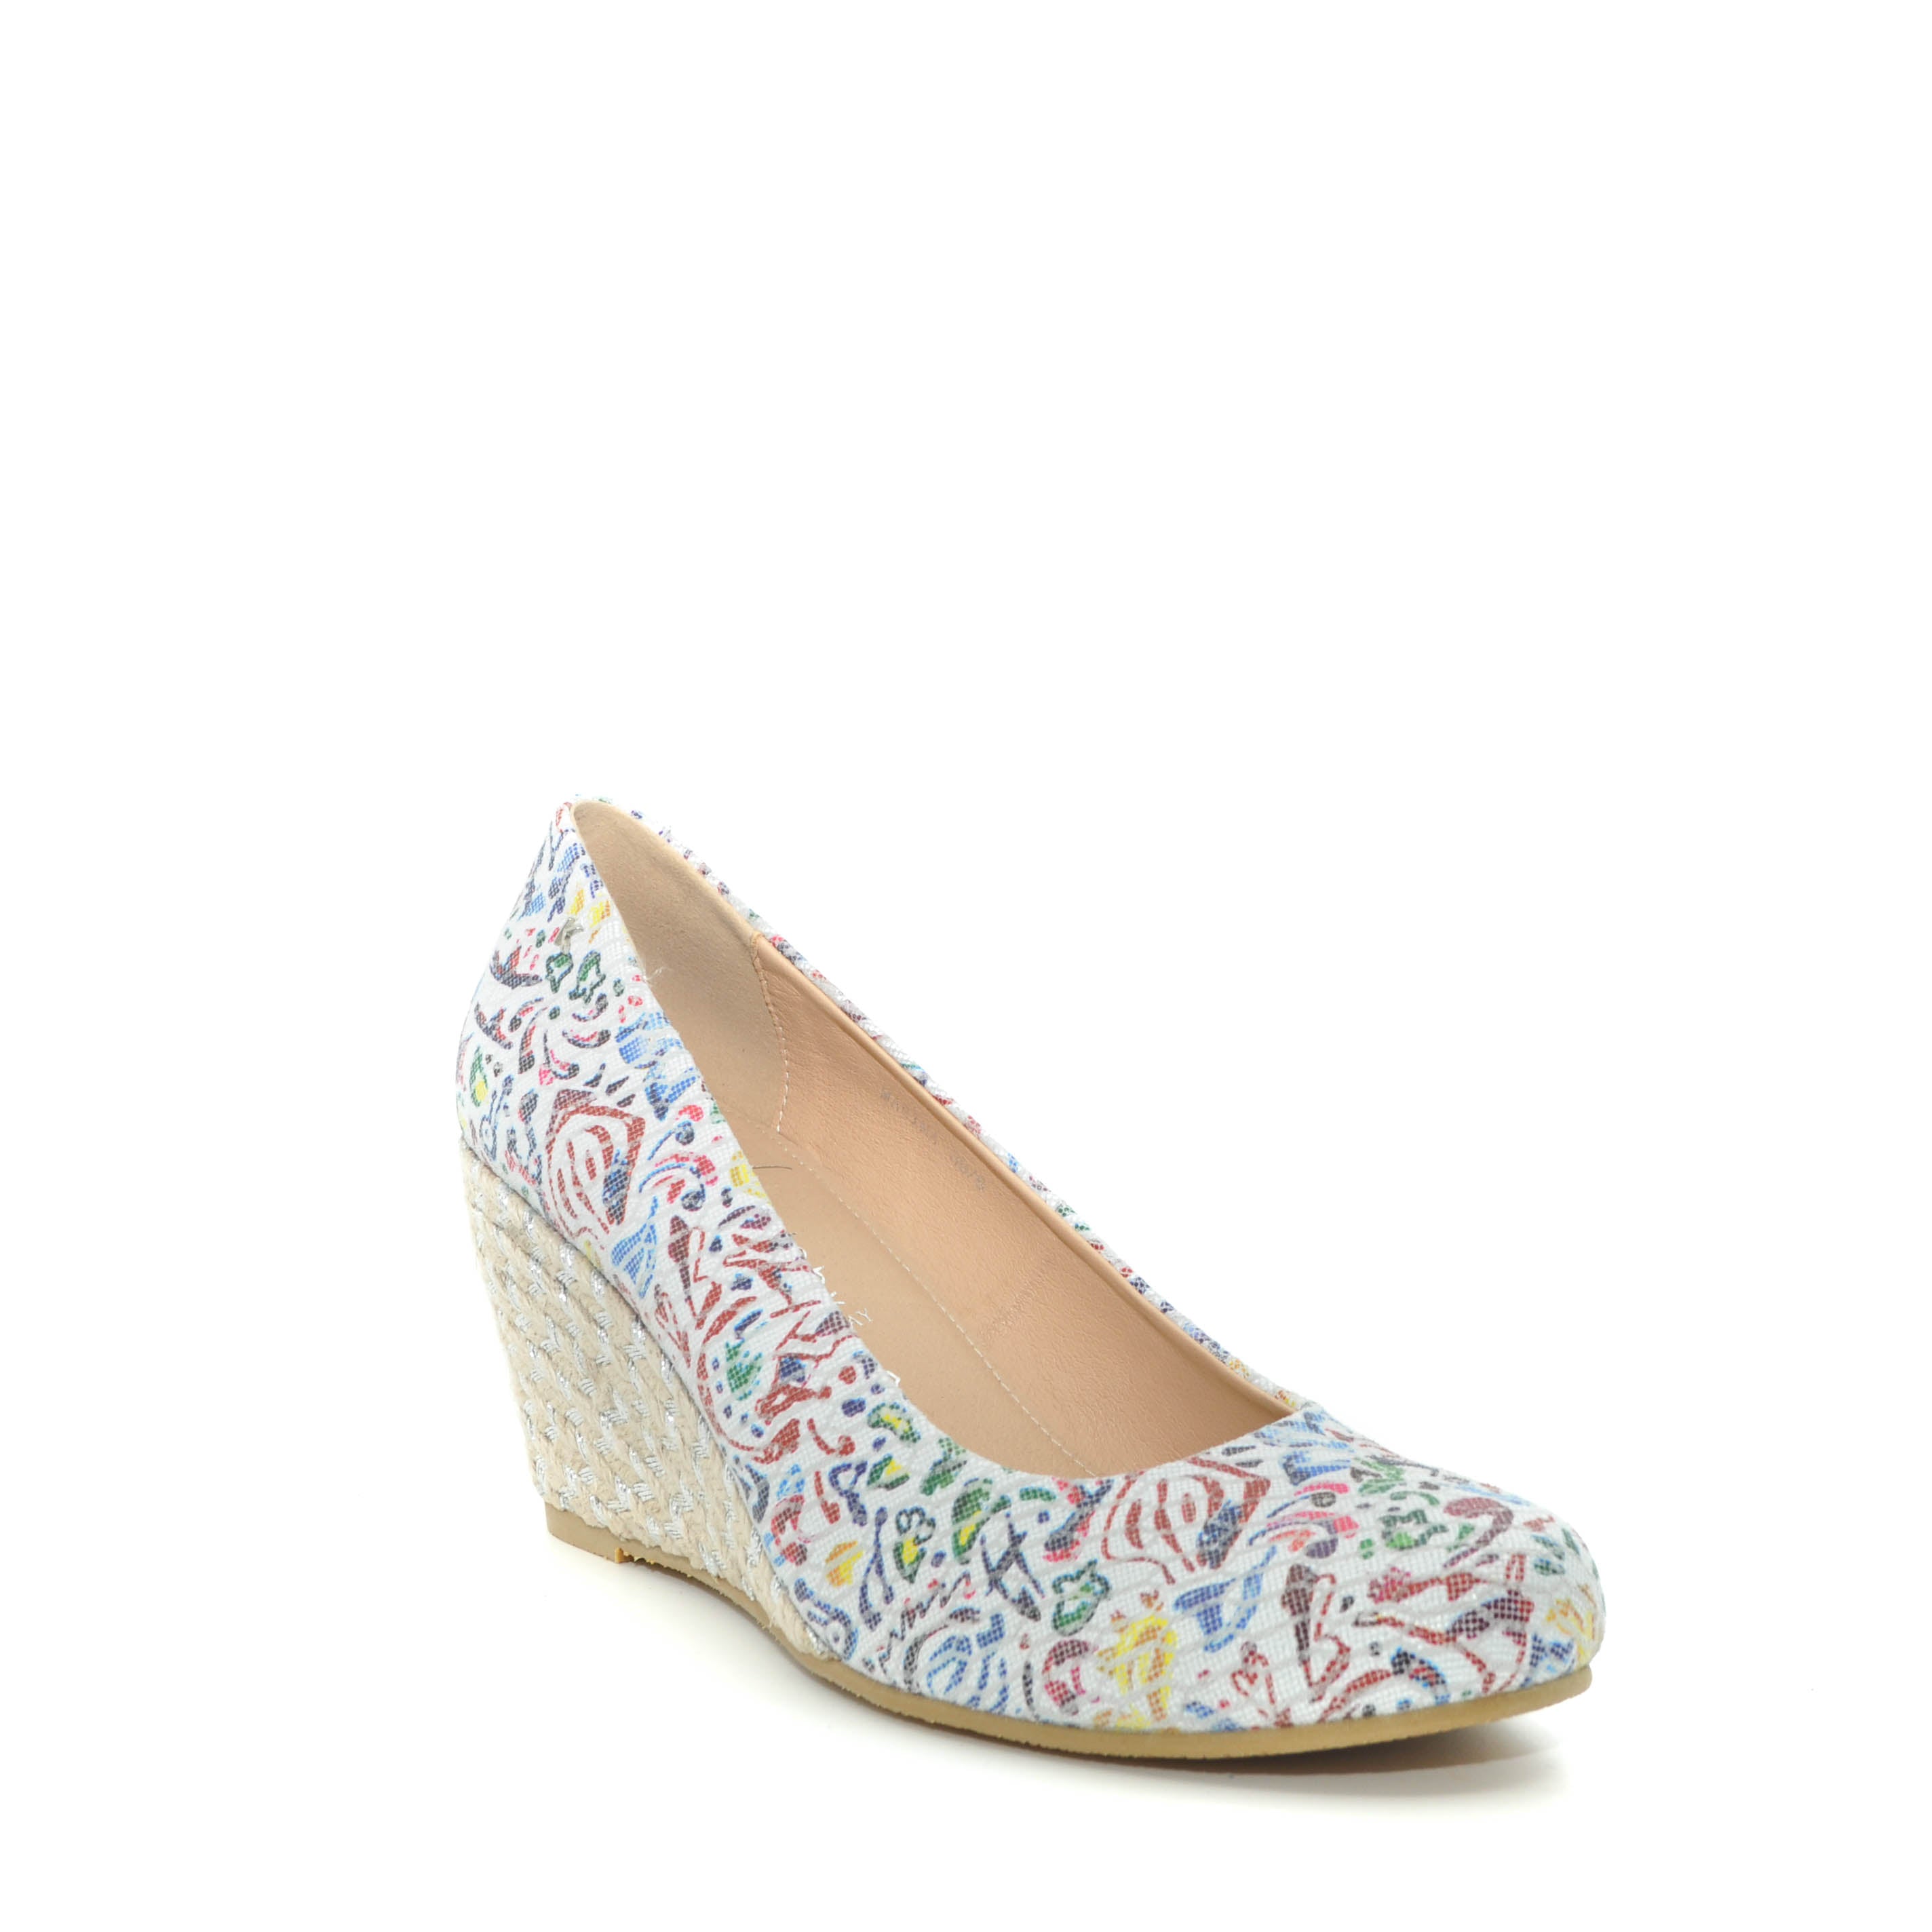 kate appleby floral wedge shoes